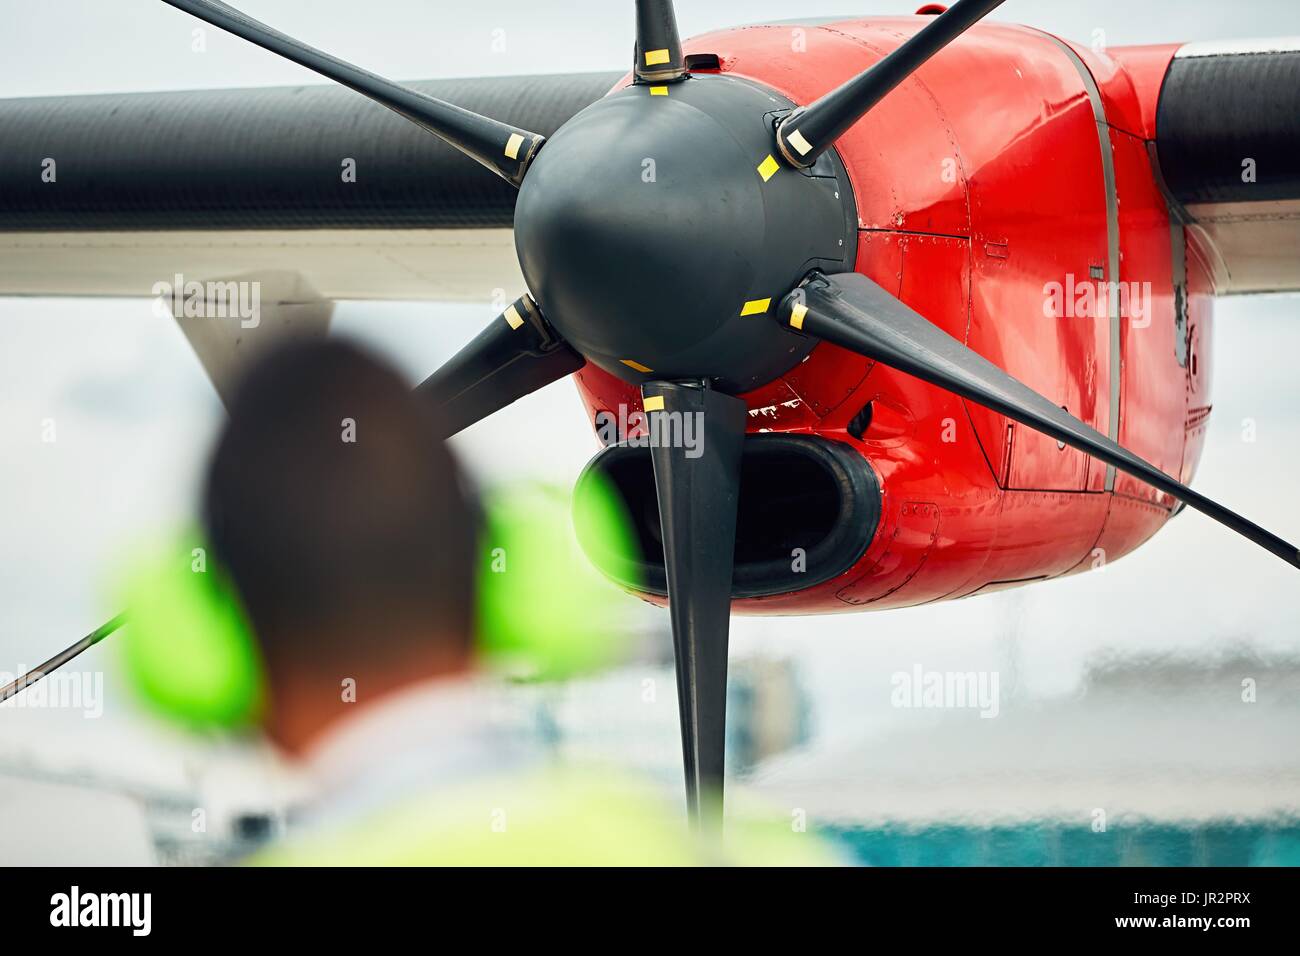 Traffic at the airport. Ground staff member checks the propeller engine before take off. Stock Photo